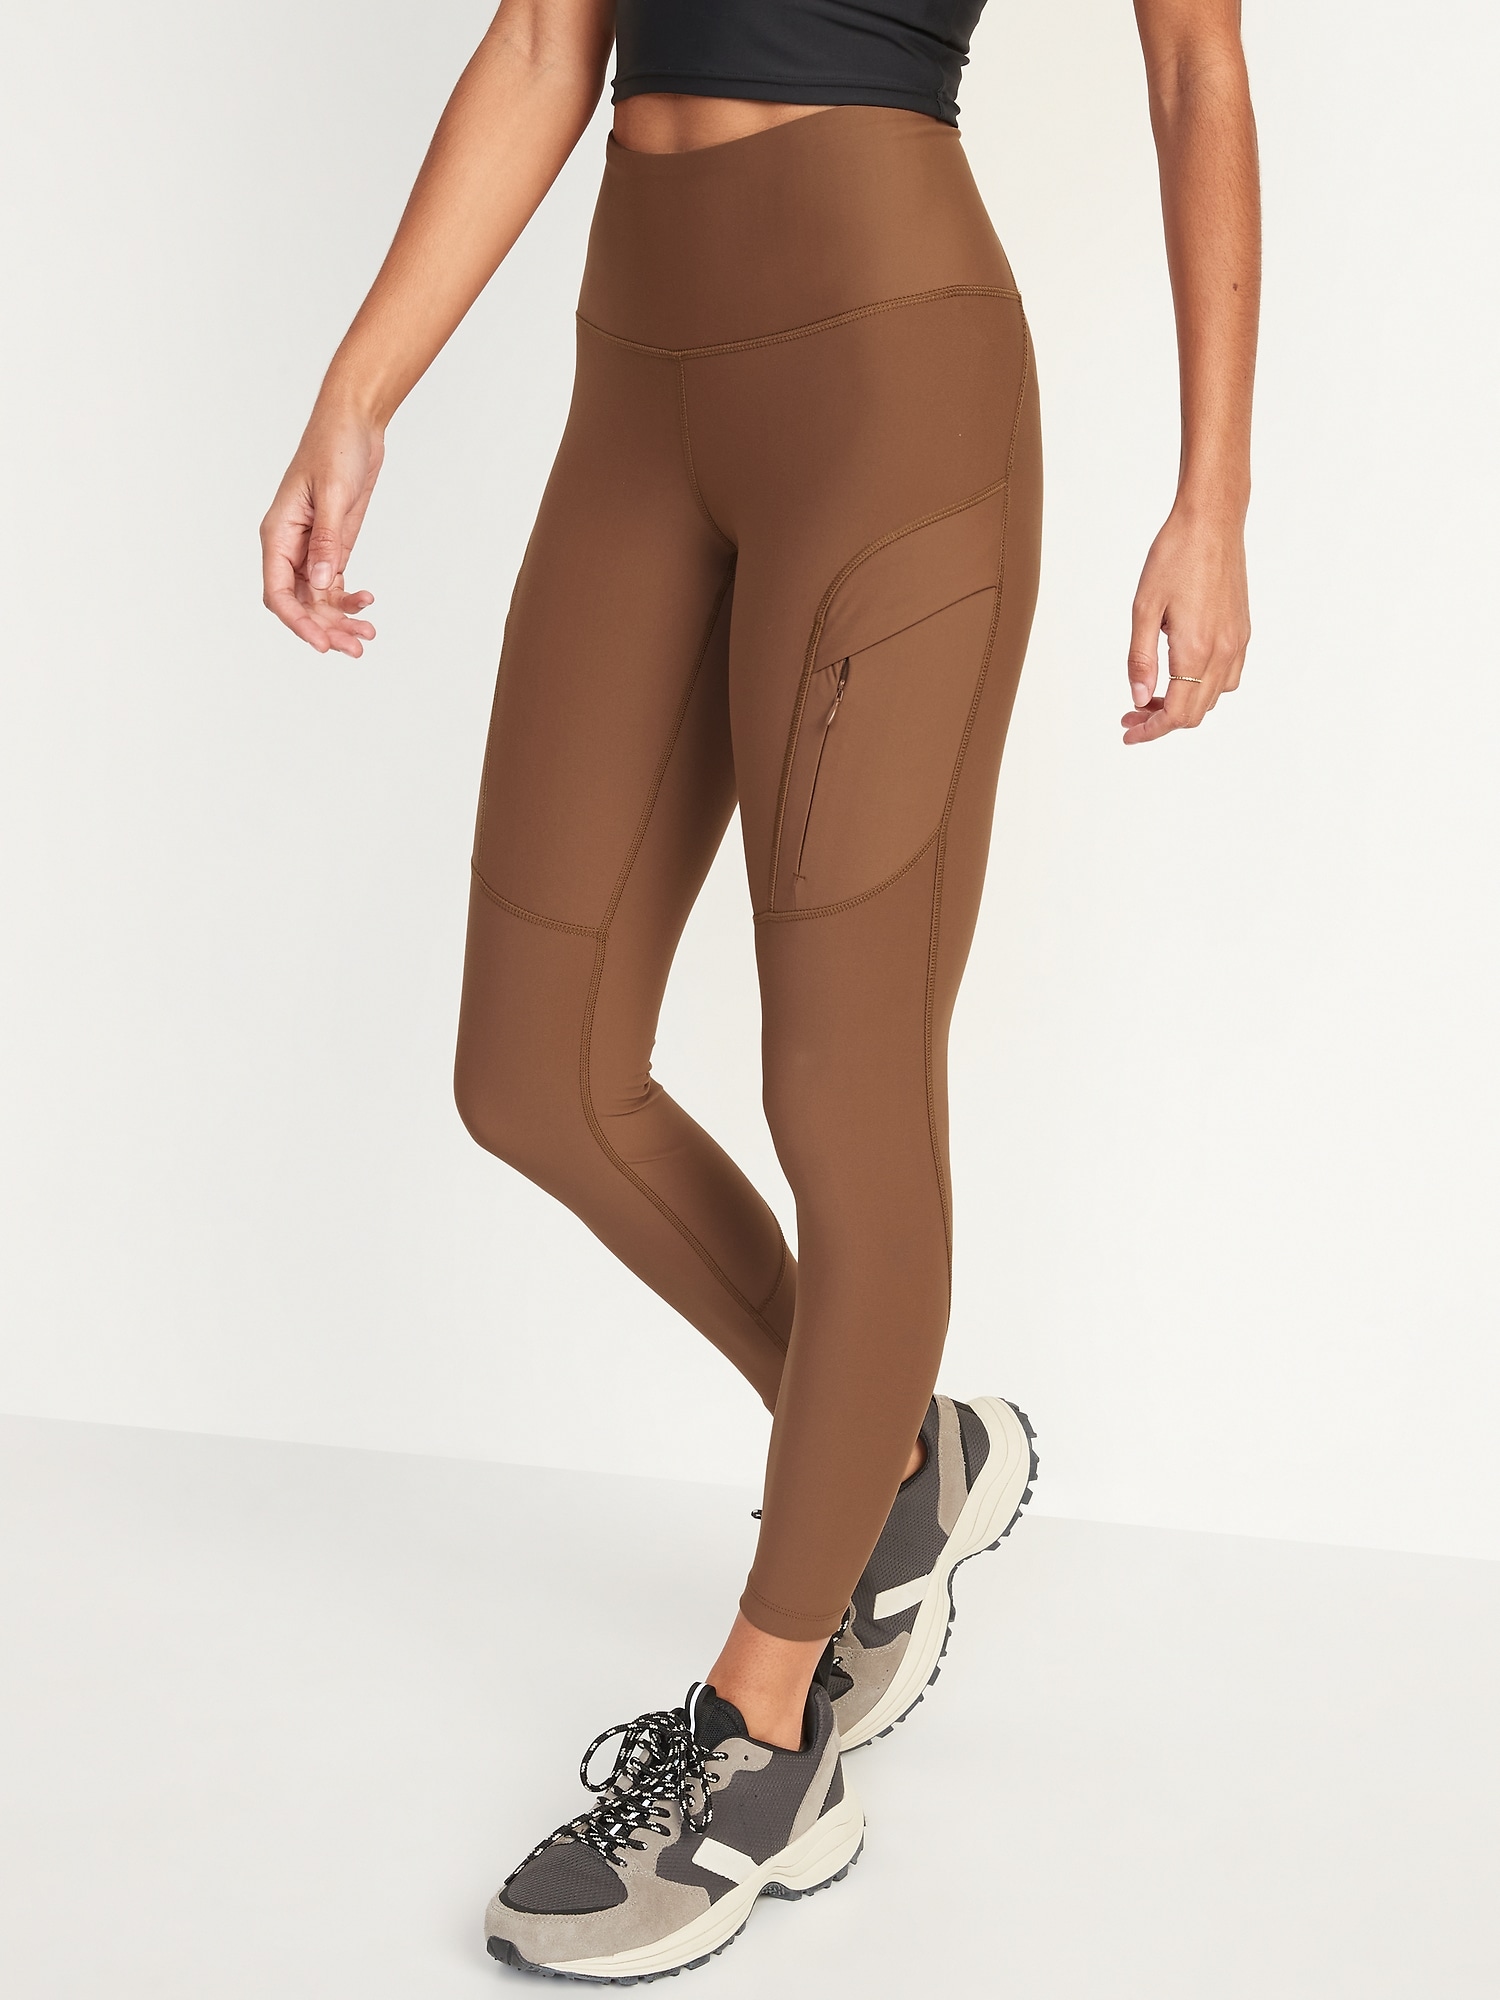 Old Navy High Waisted Powersoft 7/8 Length Cargo Leggings NWT Size XXL -  $28 New With Tags - From Selin